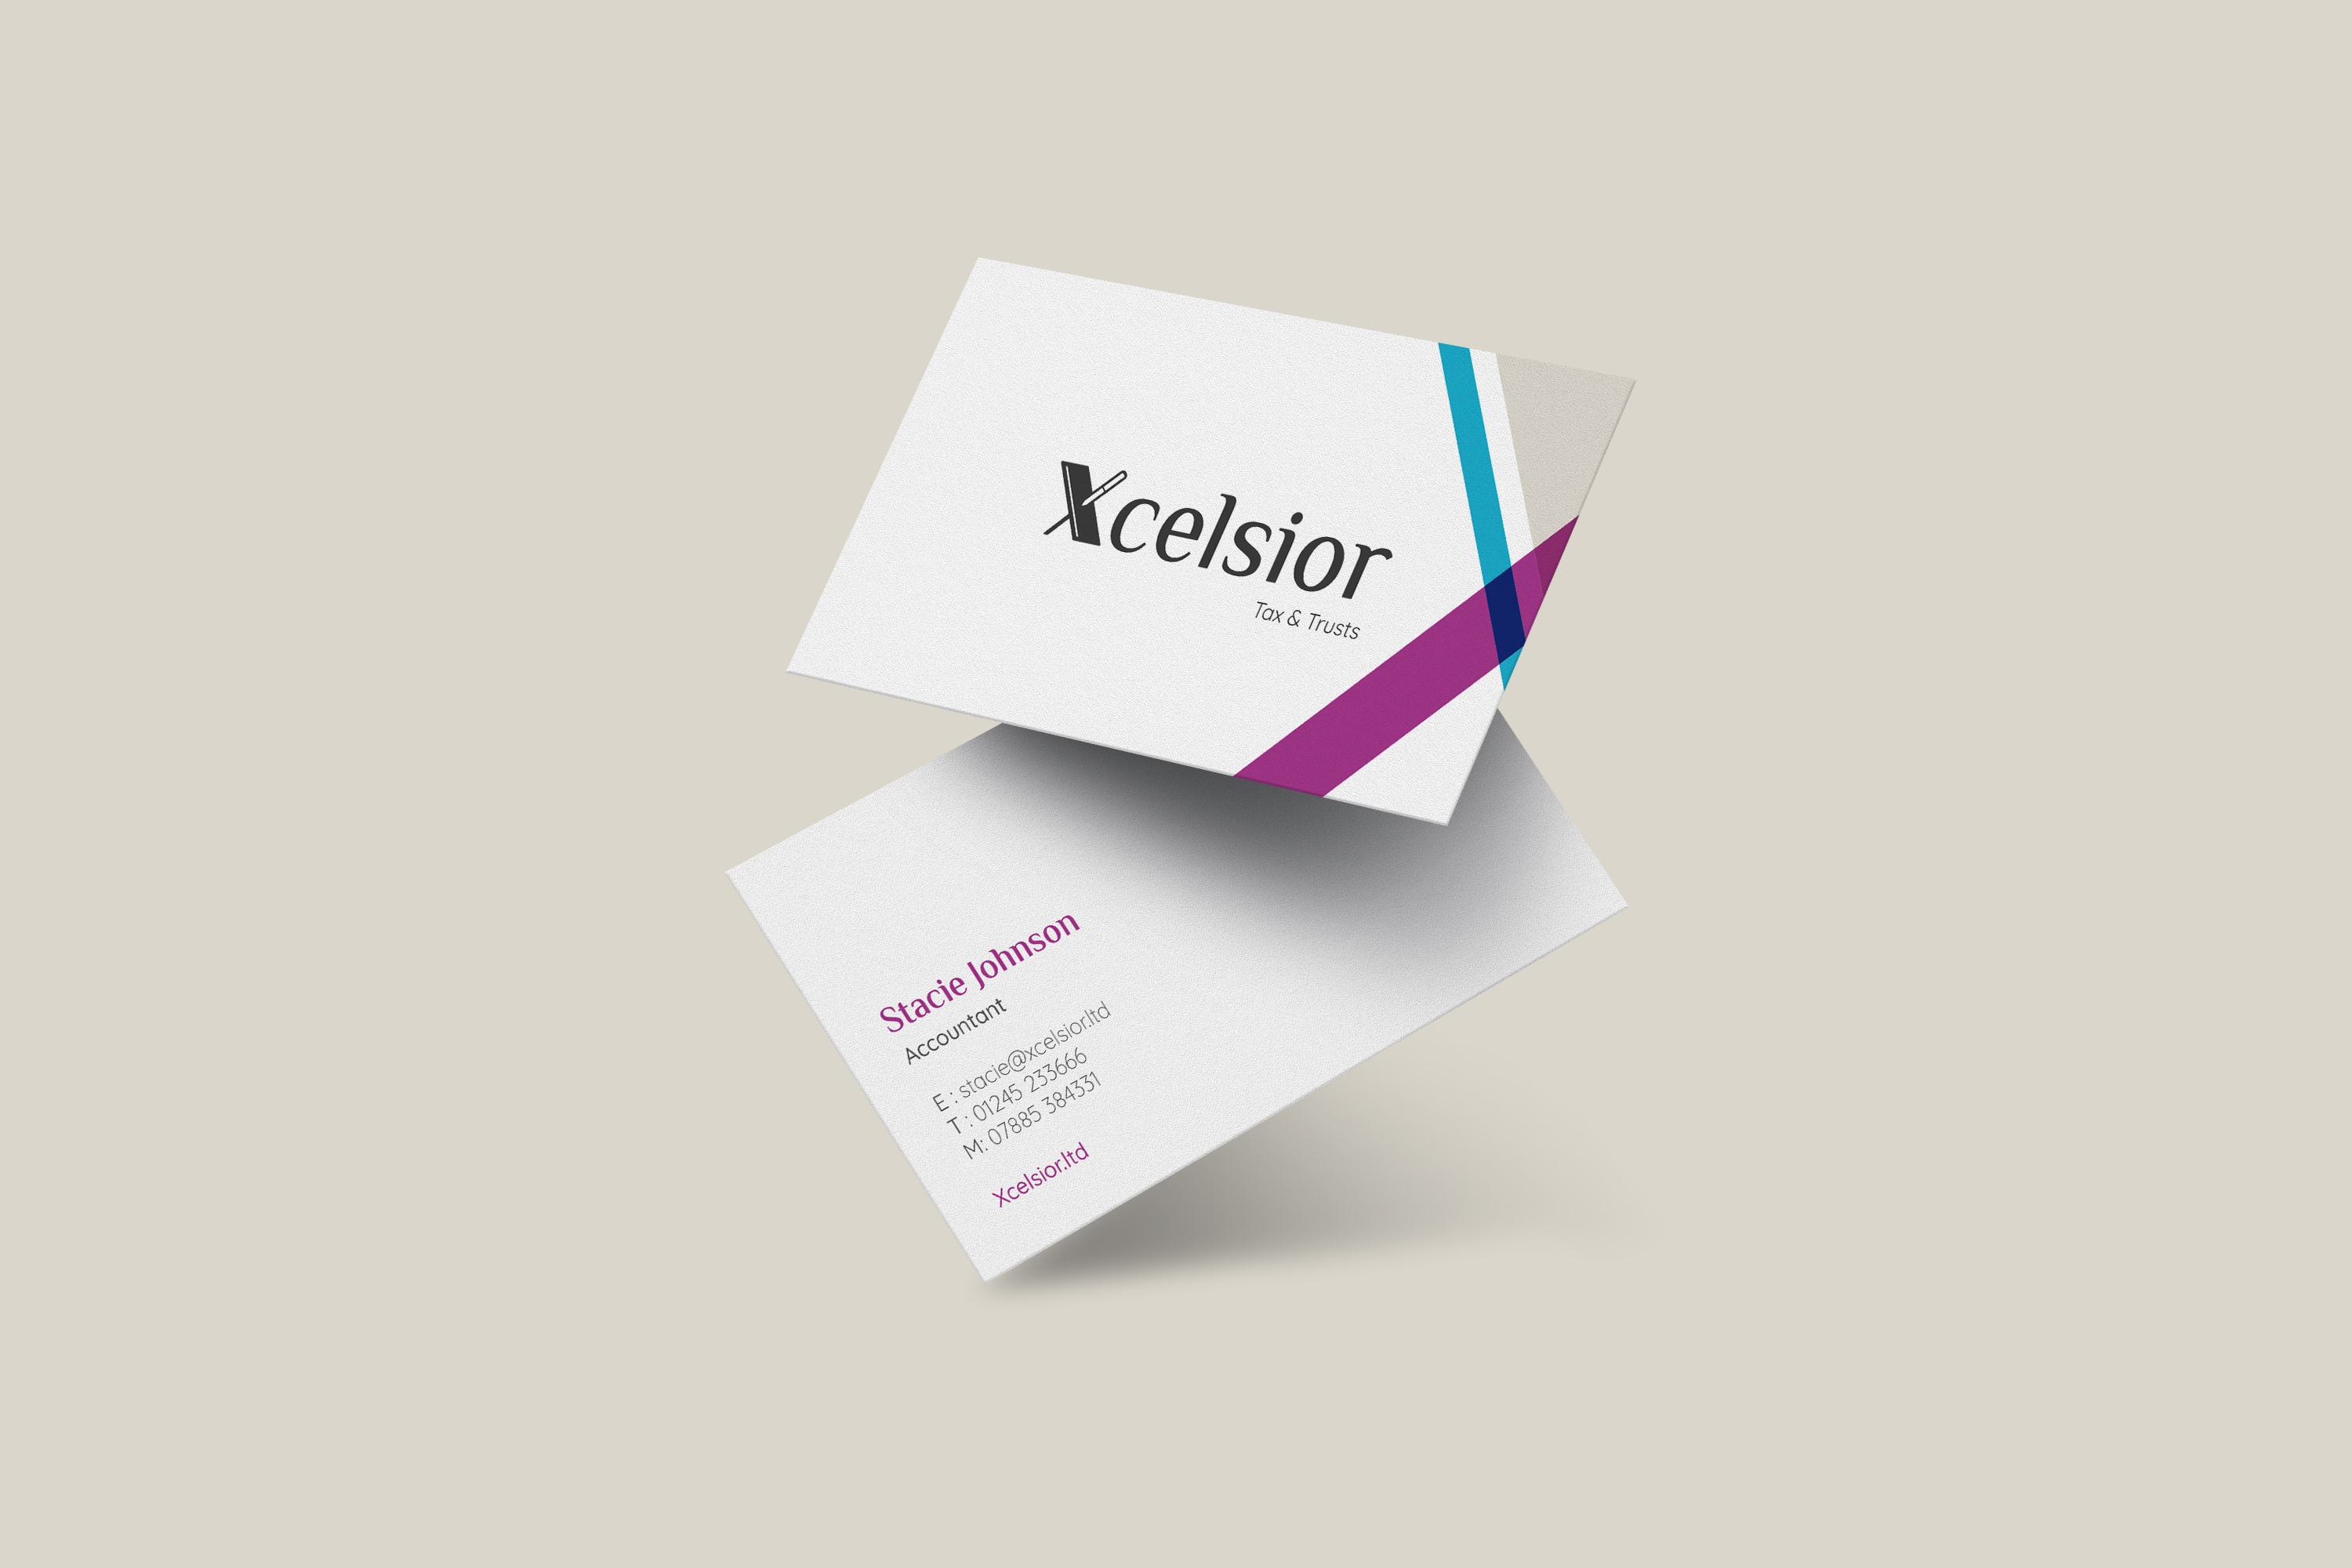 Xcelsior business cards A